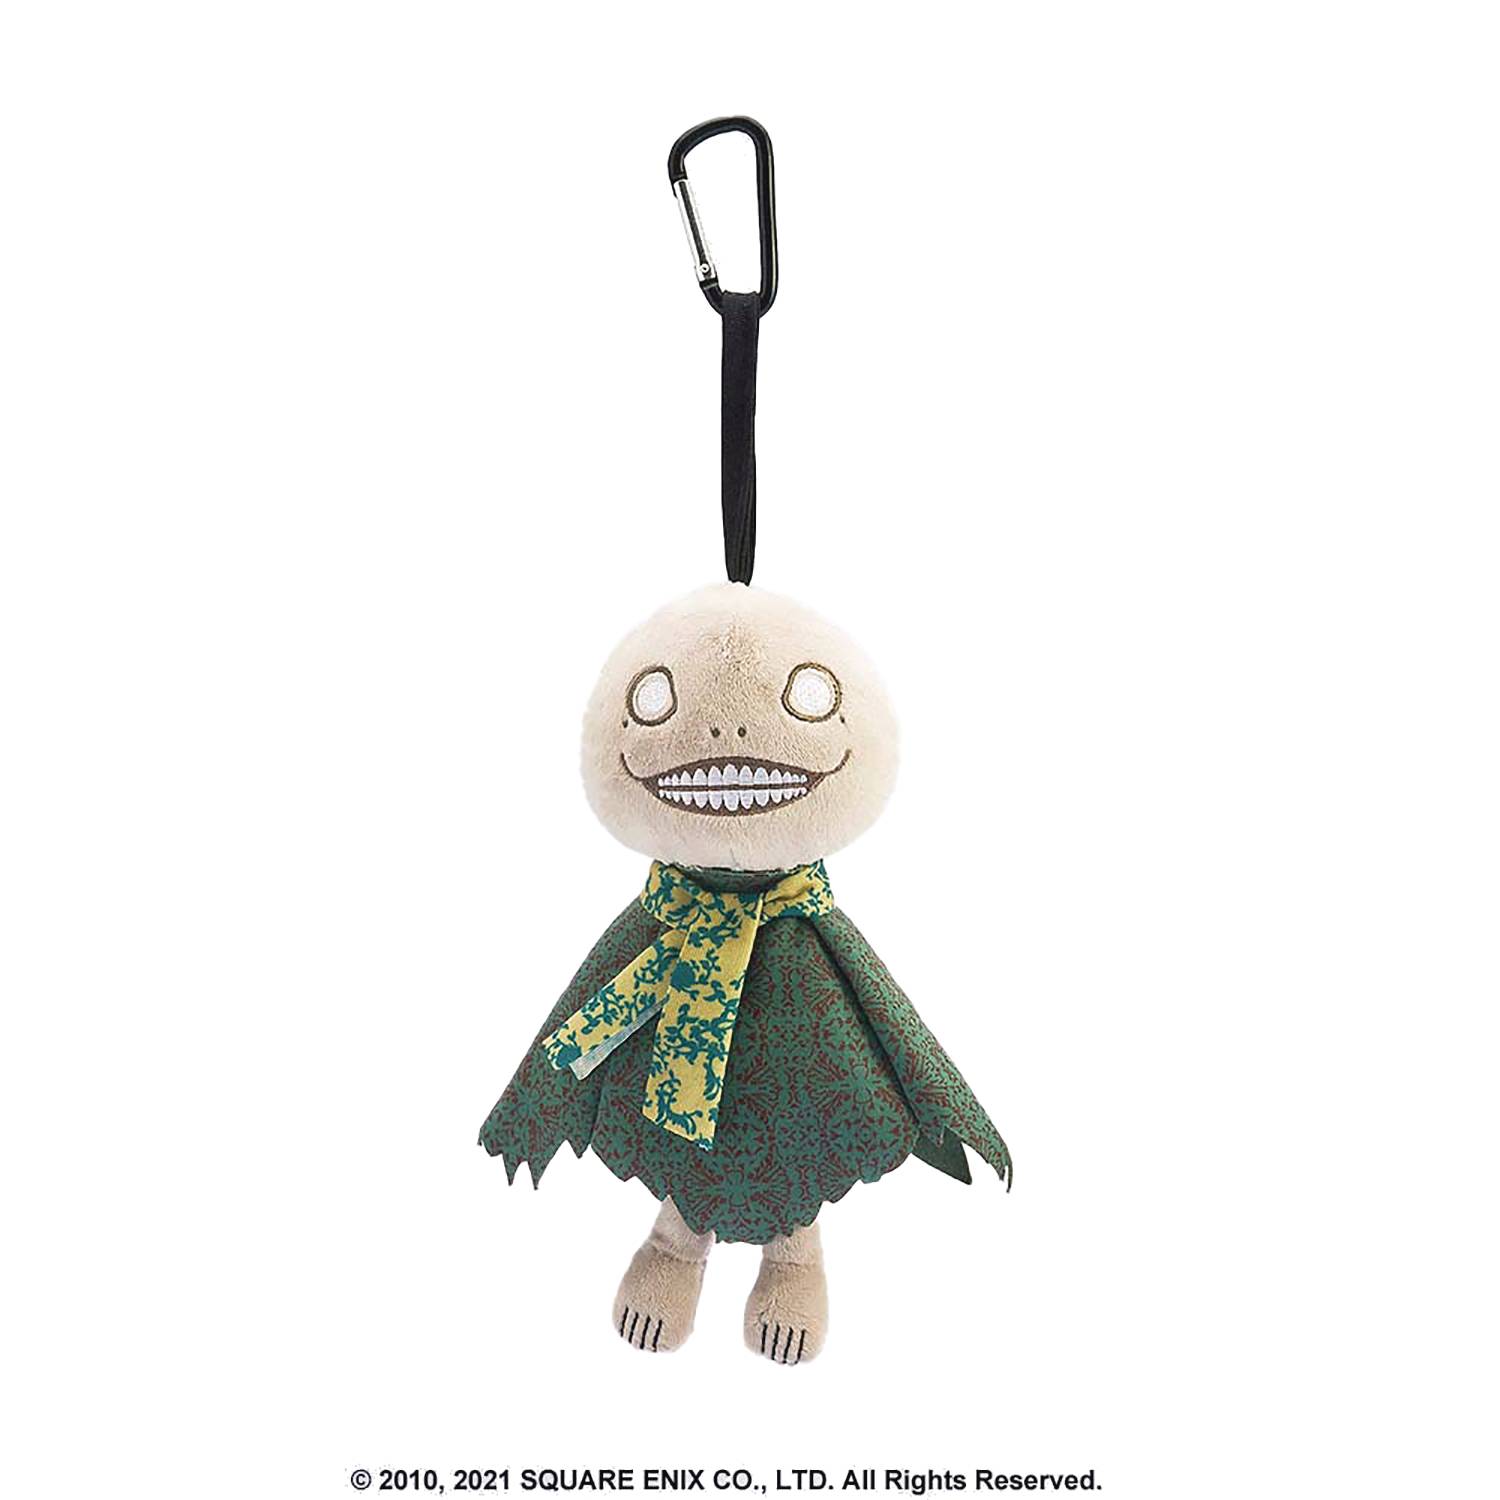 NIER REPLICANT VER.1.22474487139 EMIL HANGING POUCH